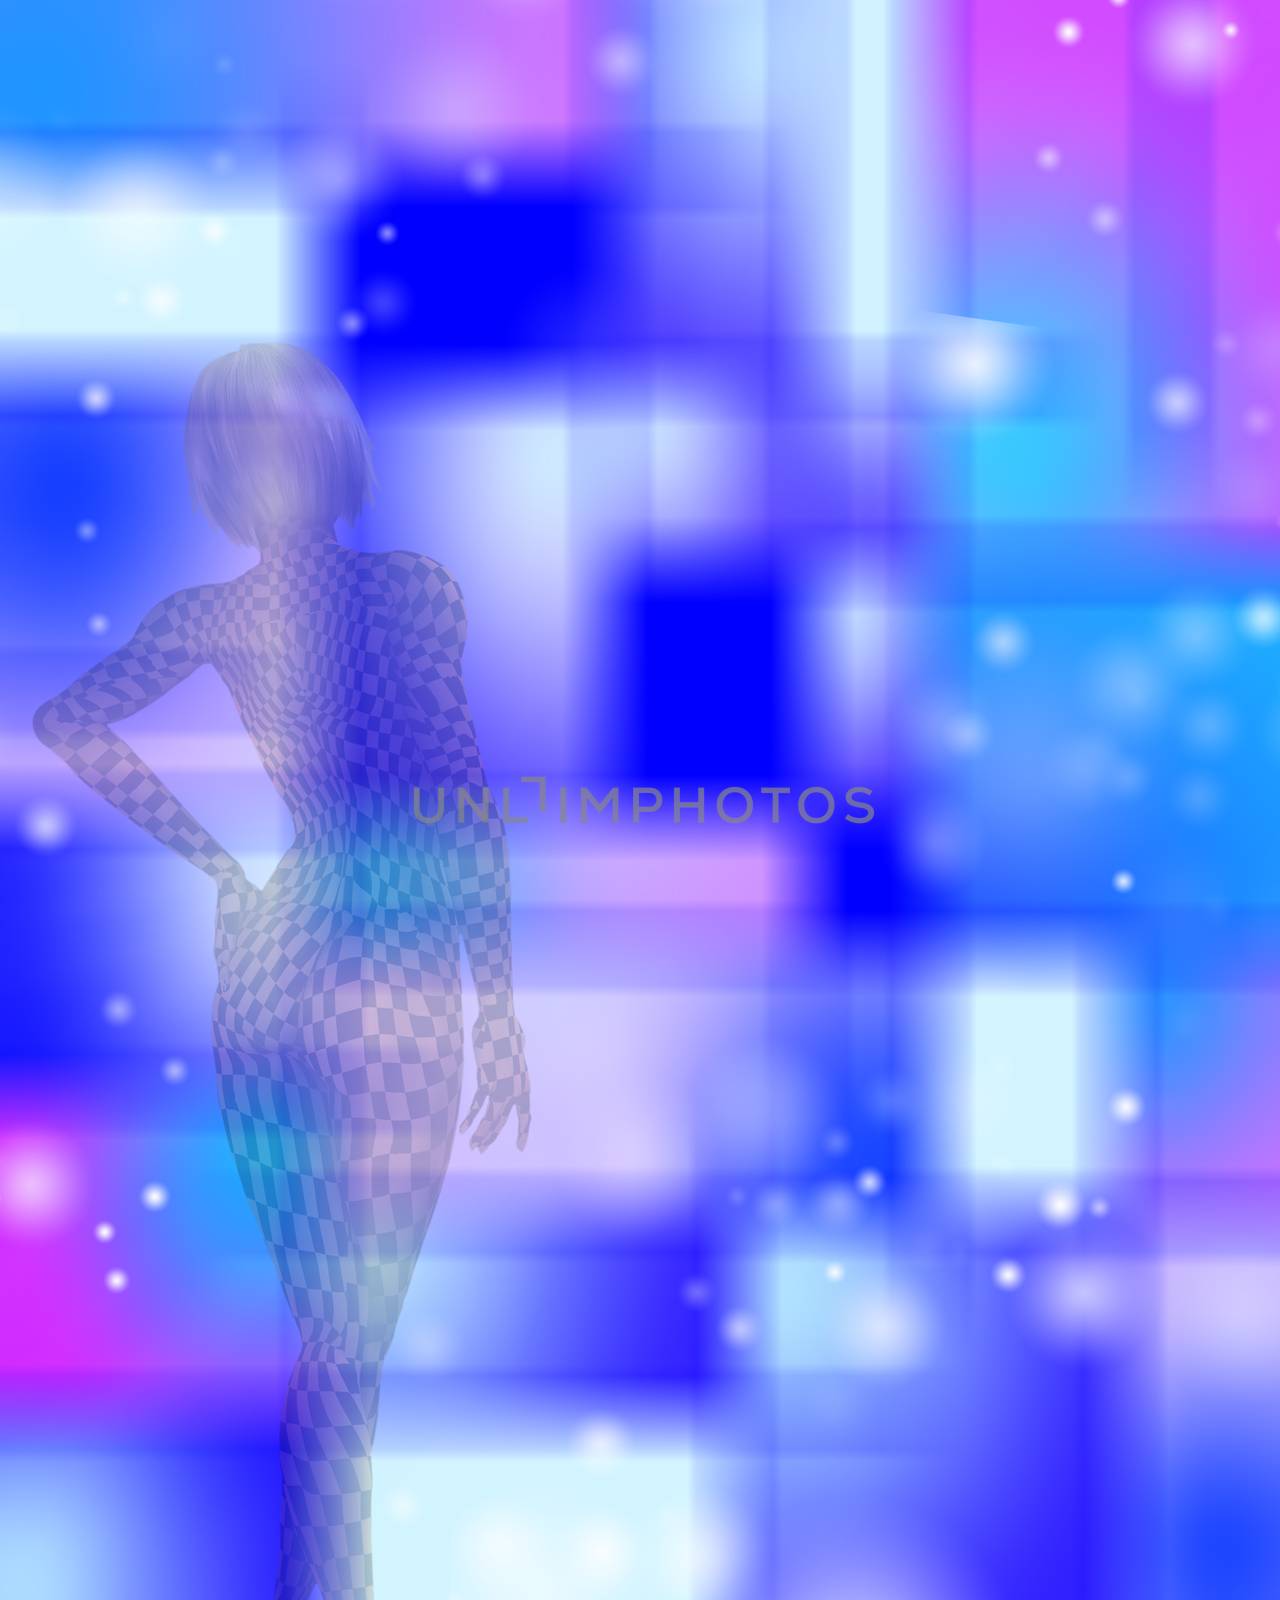 Checkered women in abstract blured pattern. Glamour Blonde Girl